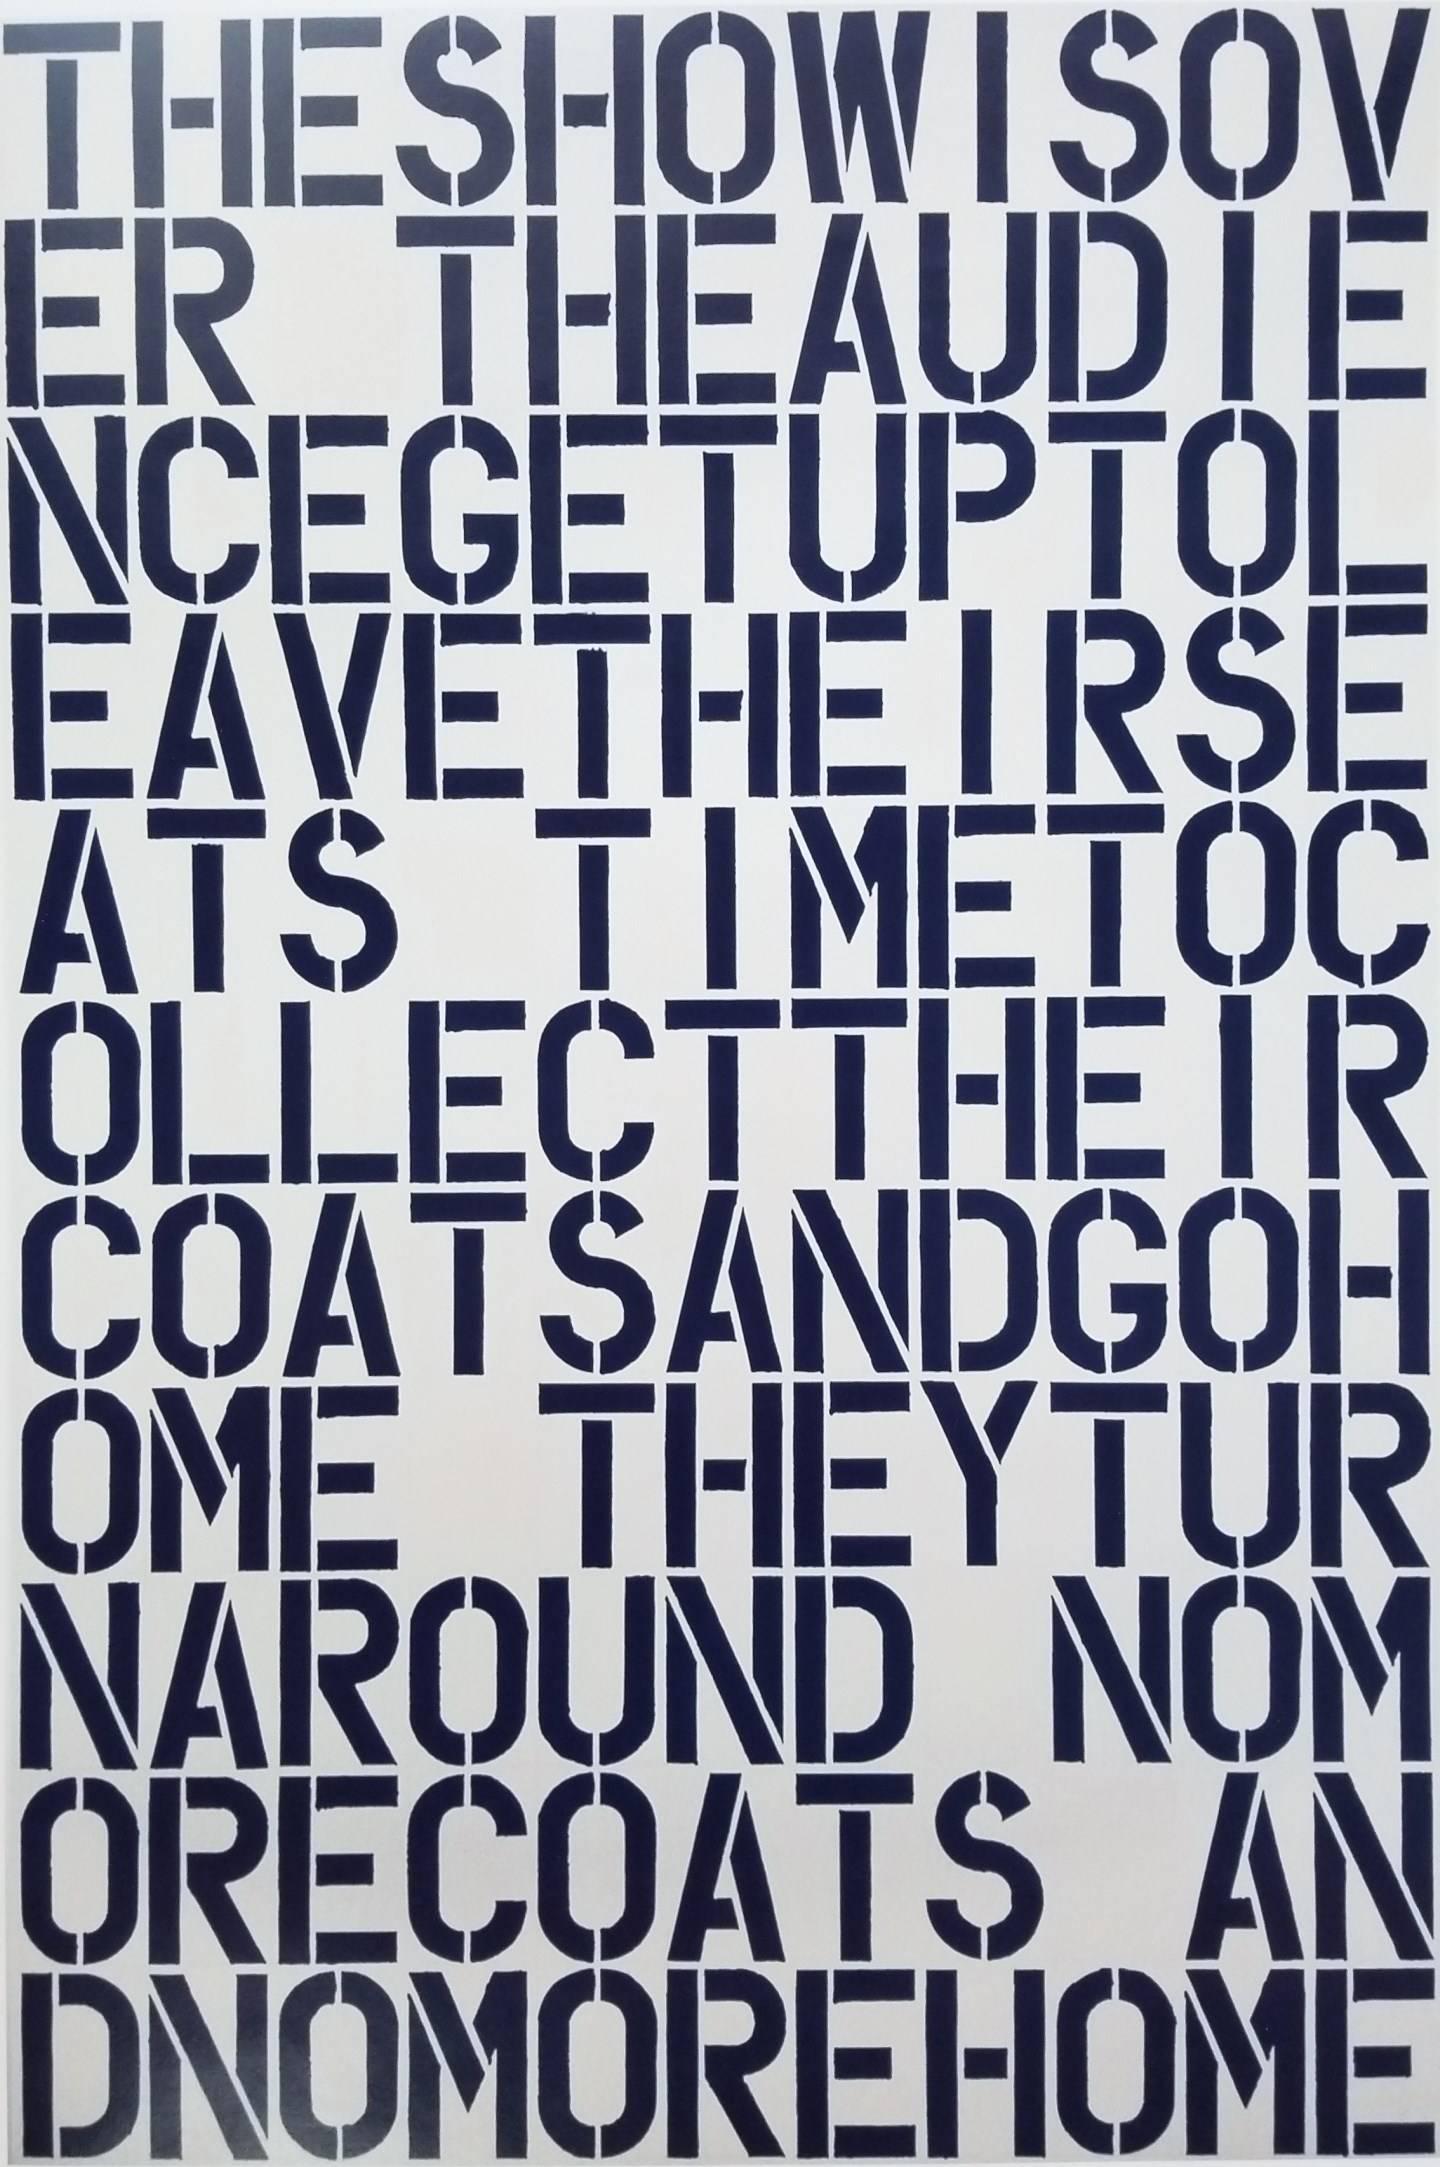 Dallas Museum of Art (The Show is Over...) - Print by Christopher Wool